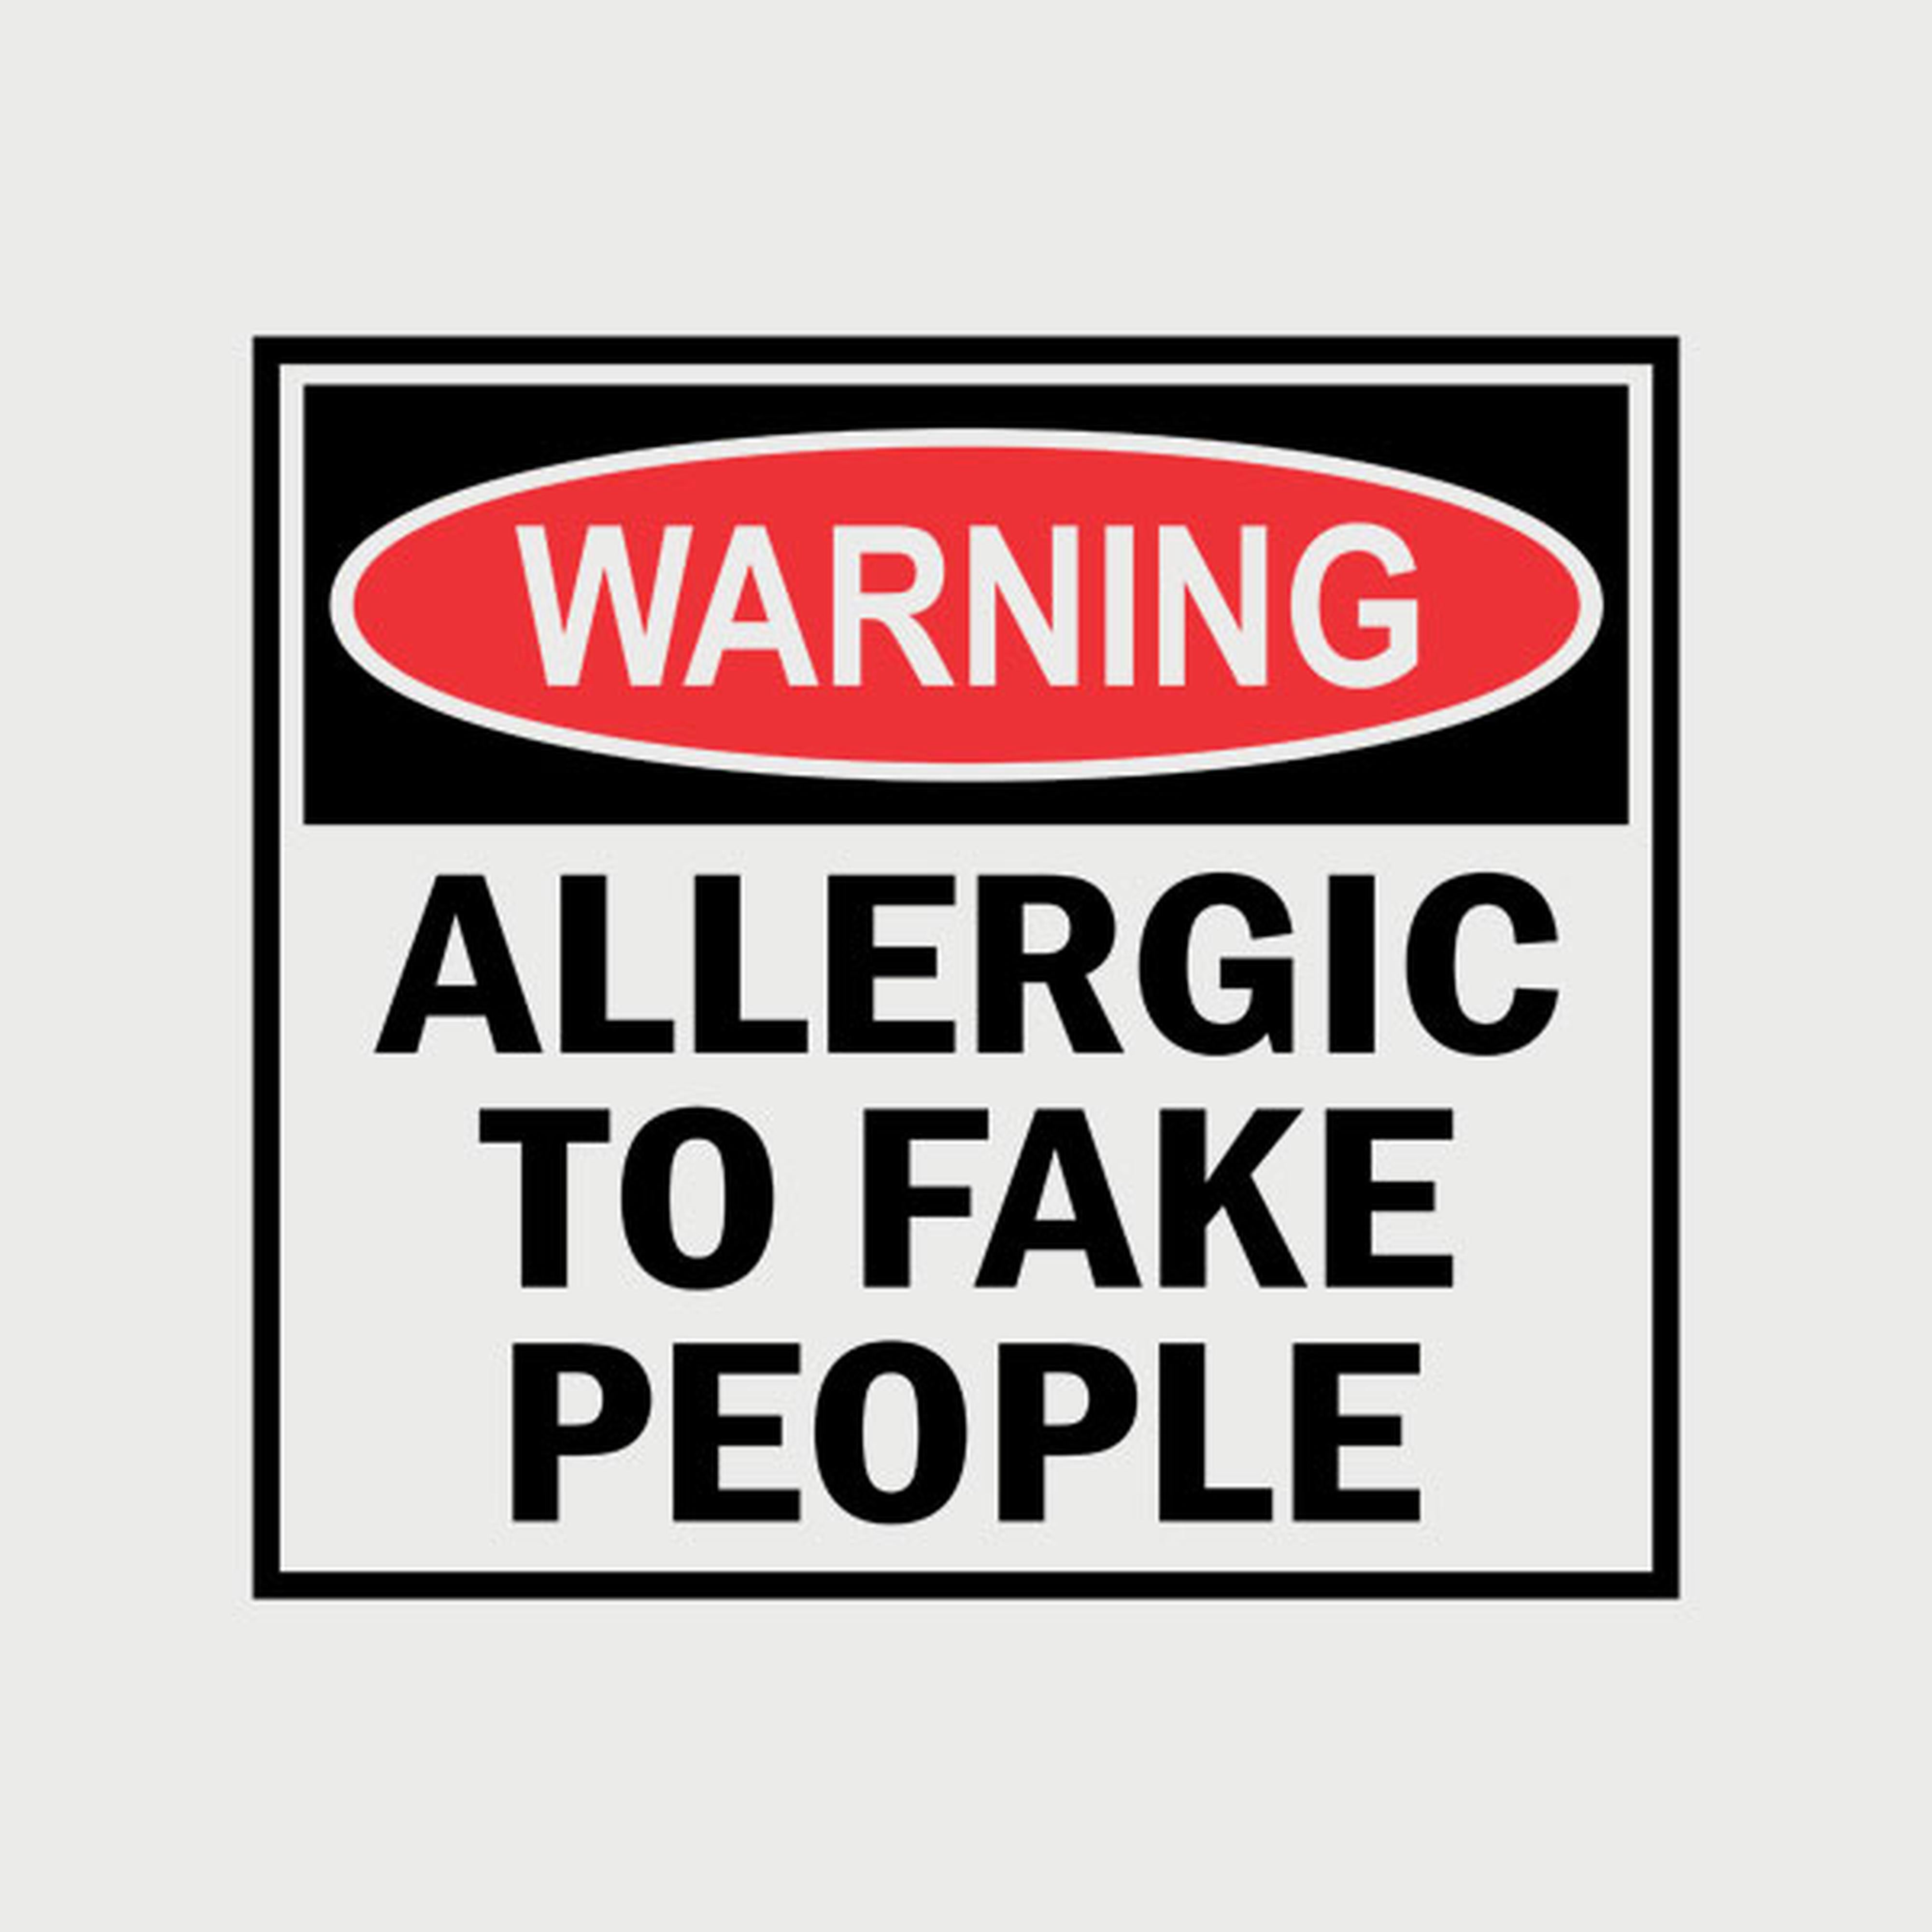 Allergic to fake people